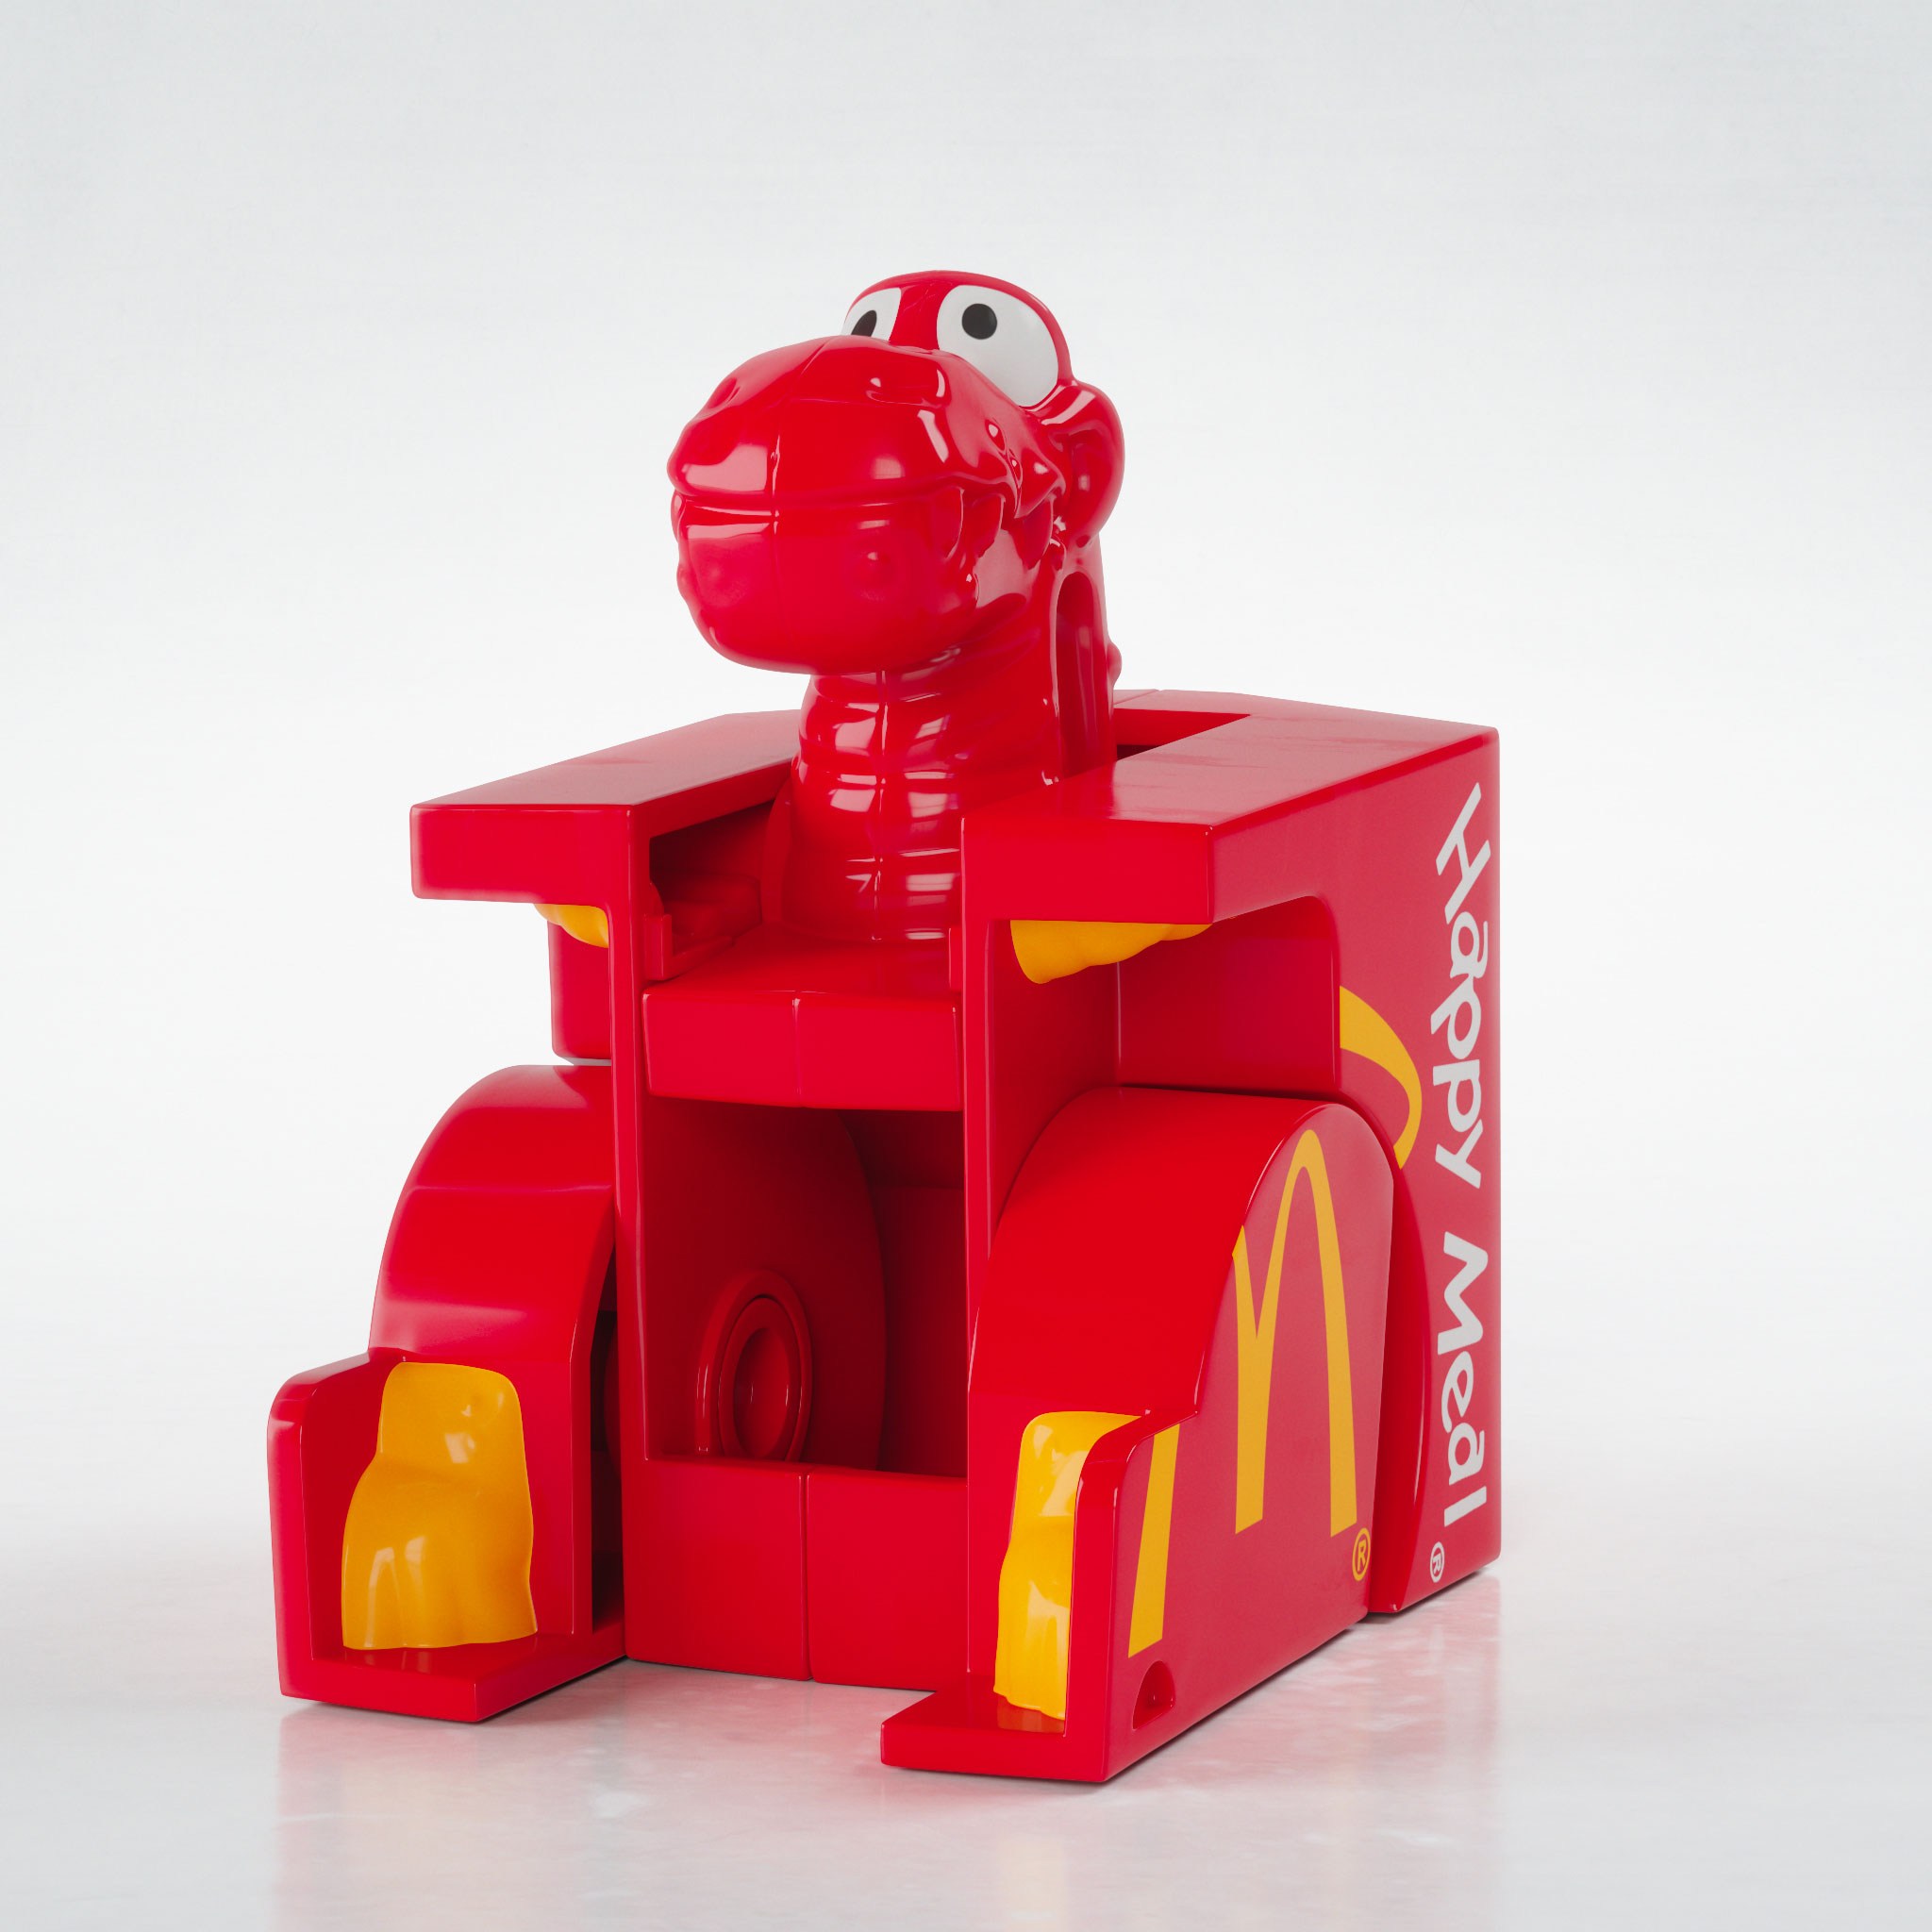 Brand New McDonalds 2019 The Surprise Toys 40th Anniversary Limited Edition 